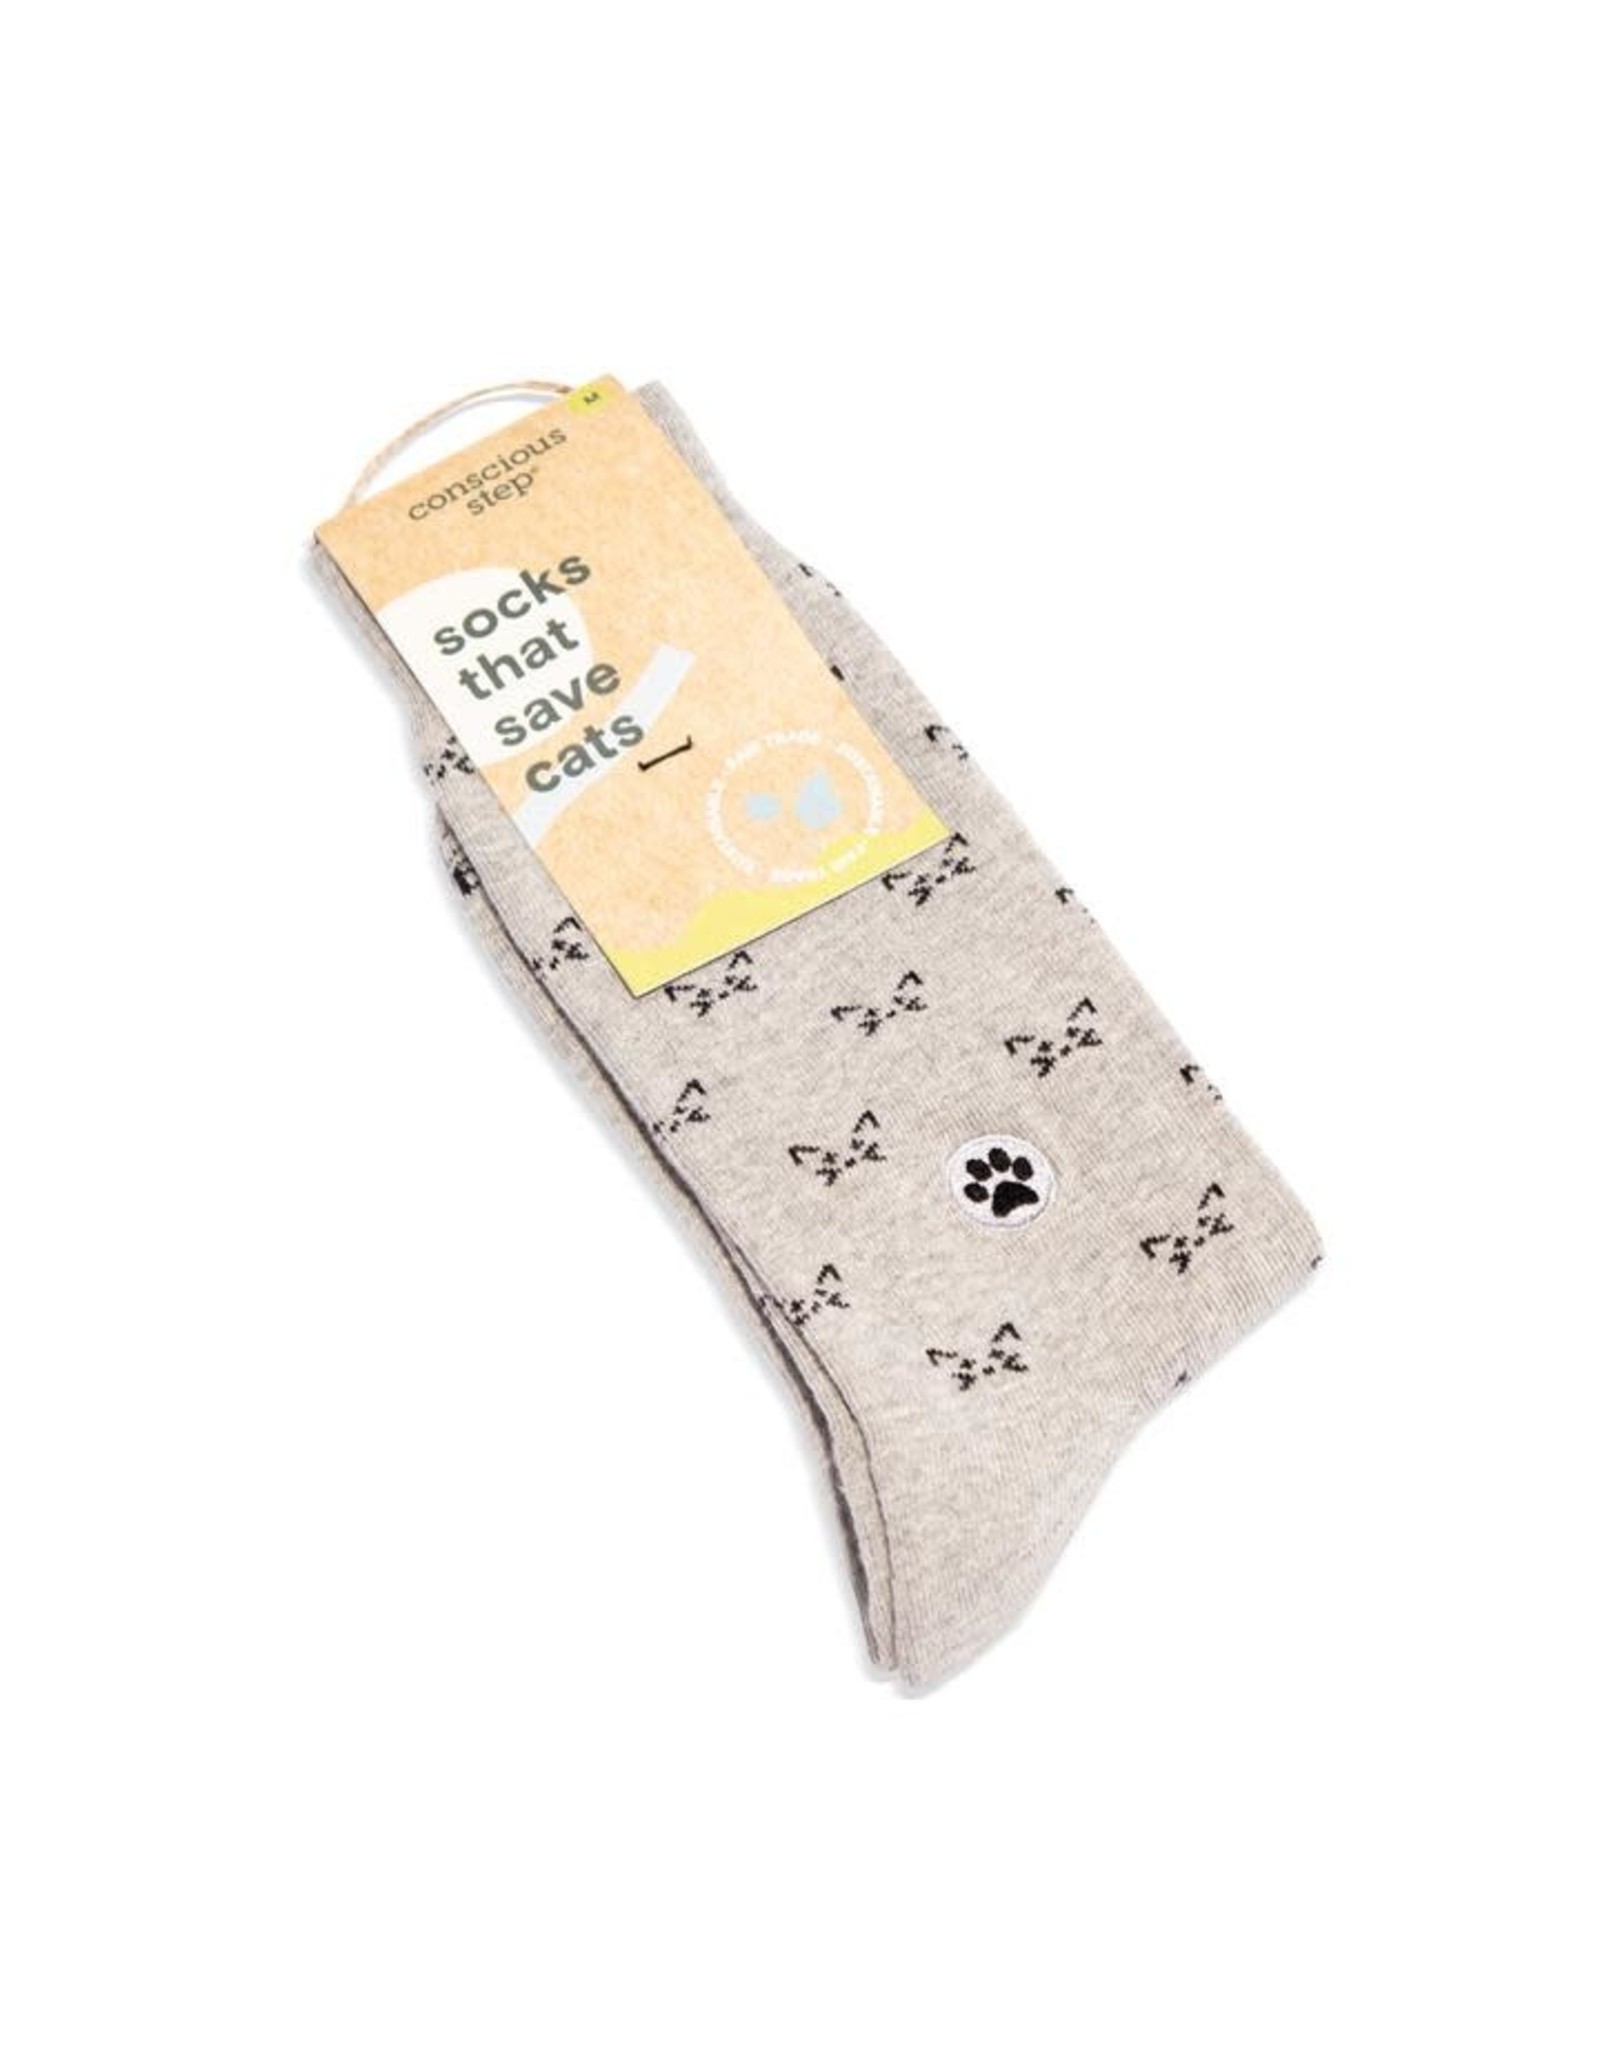 Socks That Save Cats, Gray